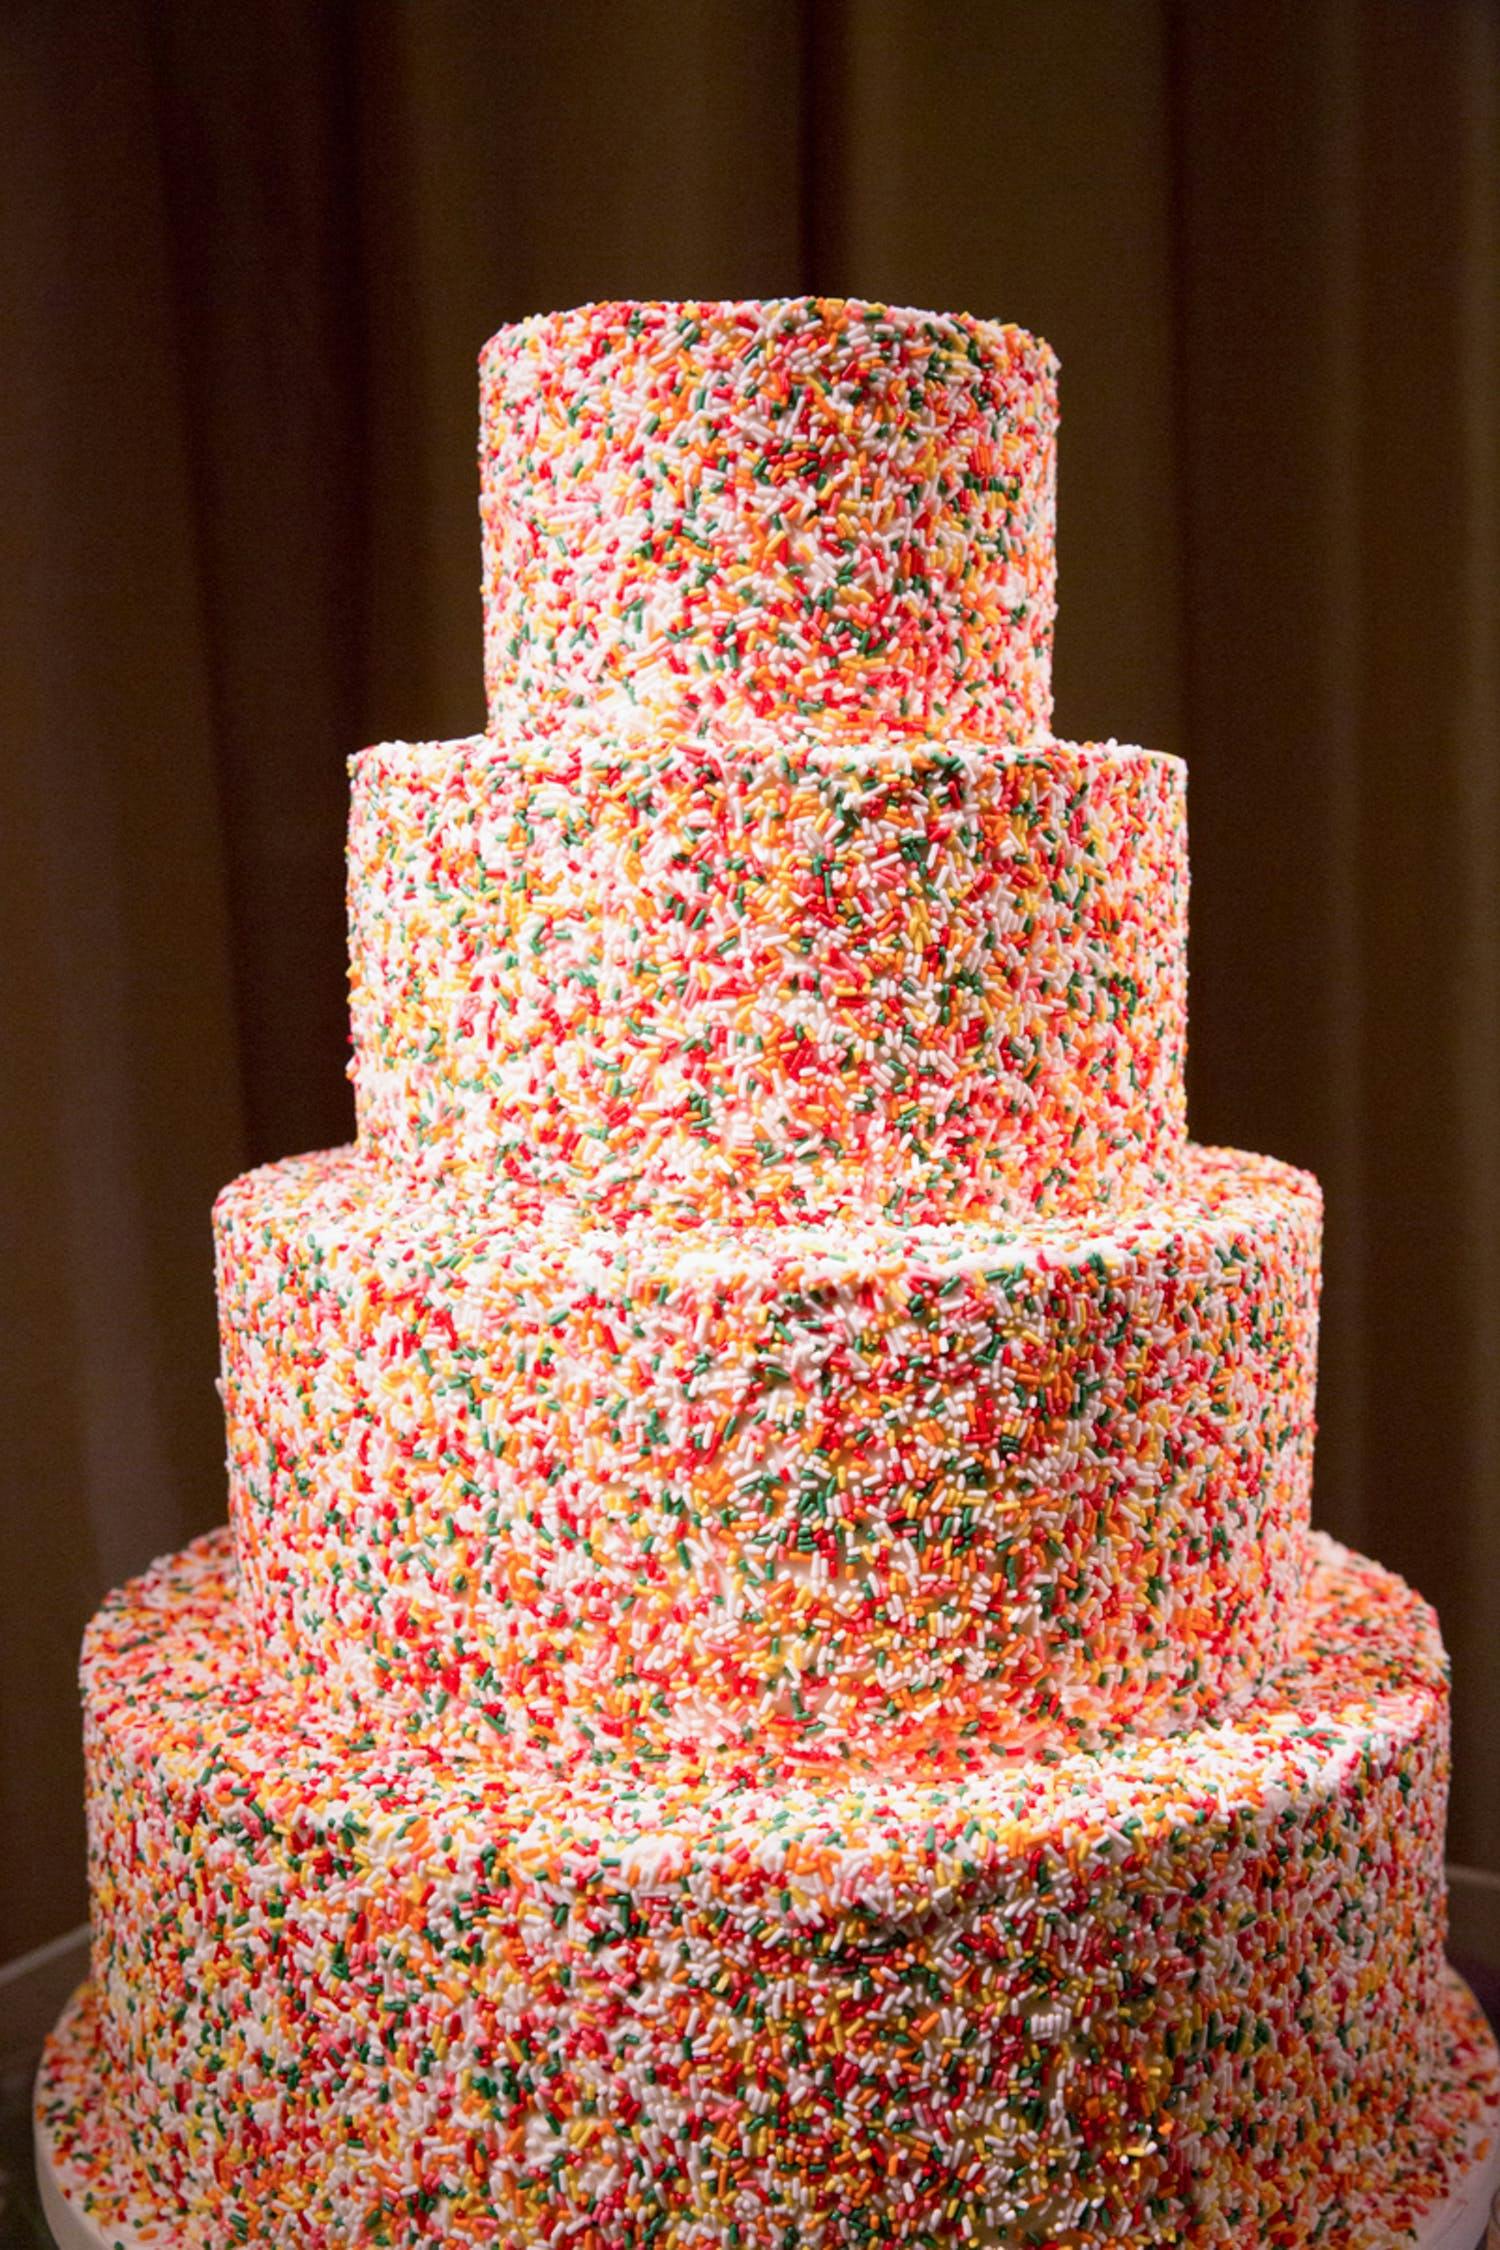 Large four-tier wedding cake covered in colorful sprinkles | PartySlate